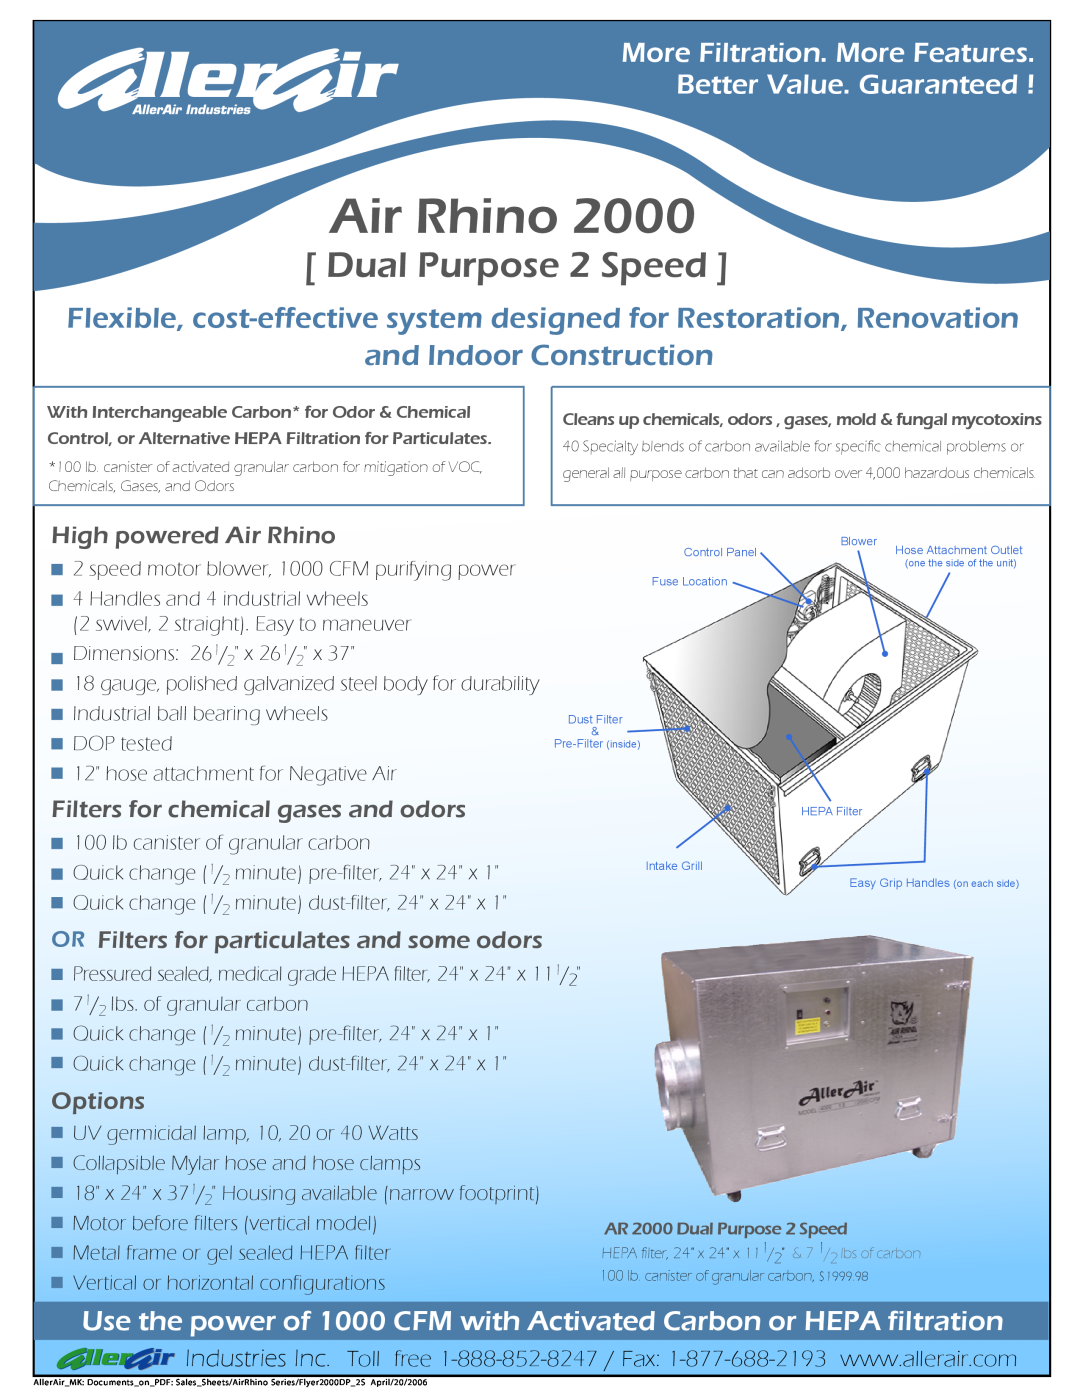 AllerAir Air Rhino 2000 dimensions Dual Purpose 2 Speed, and Indoor Construction, More Filtration. More Features, Options 